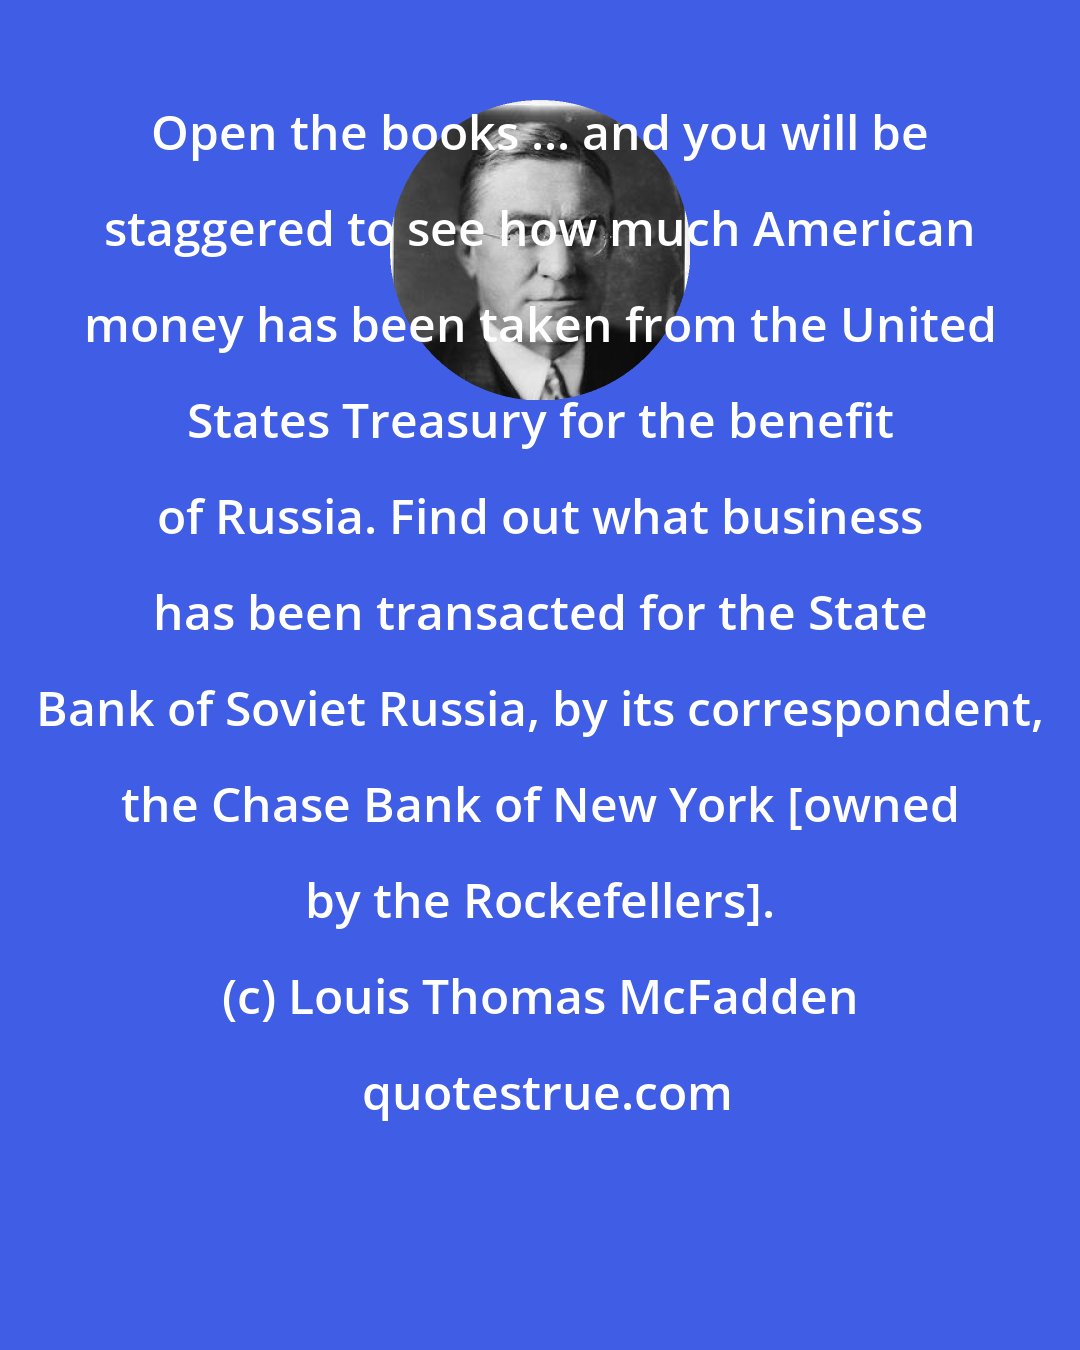 Louis Thomas McFadden: Open the books ... and you will be staggered to see how much American money has been taken from the United States Treasury for the benefit of Russia. Find out what business has been transacted for the State Bank of Soviet Russia, by its correspondent, the Chase Bank of New York [owned by the Rockefellers].